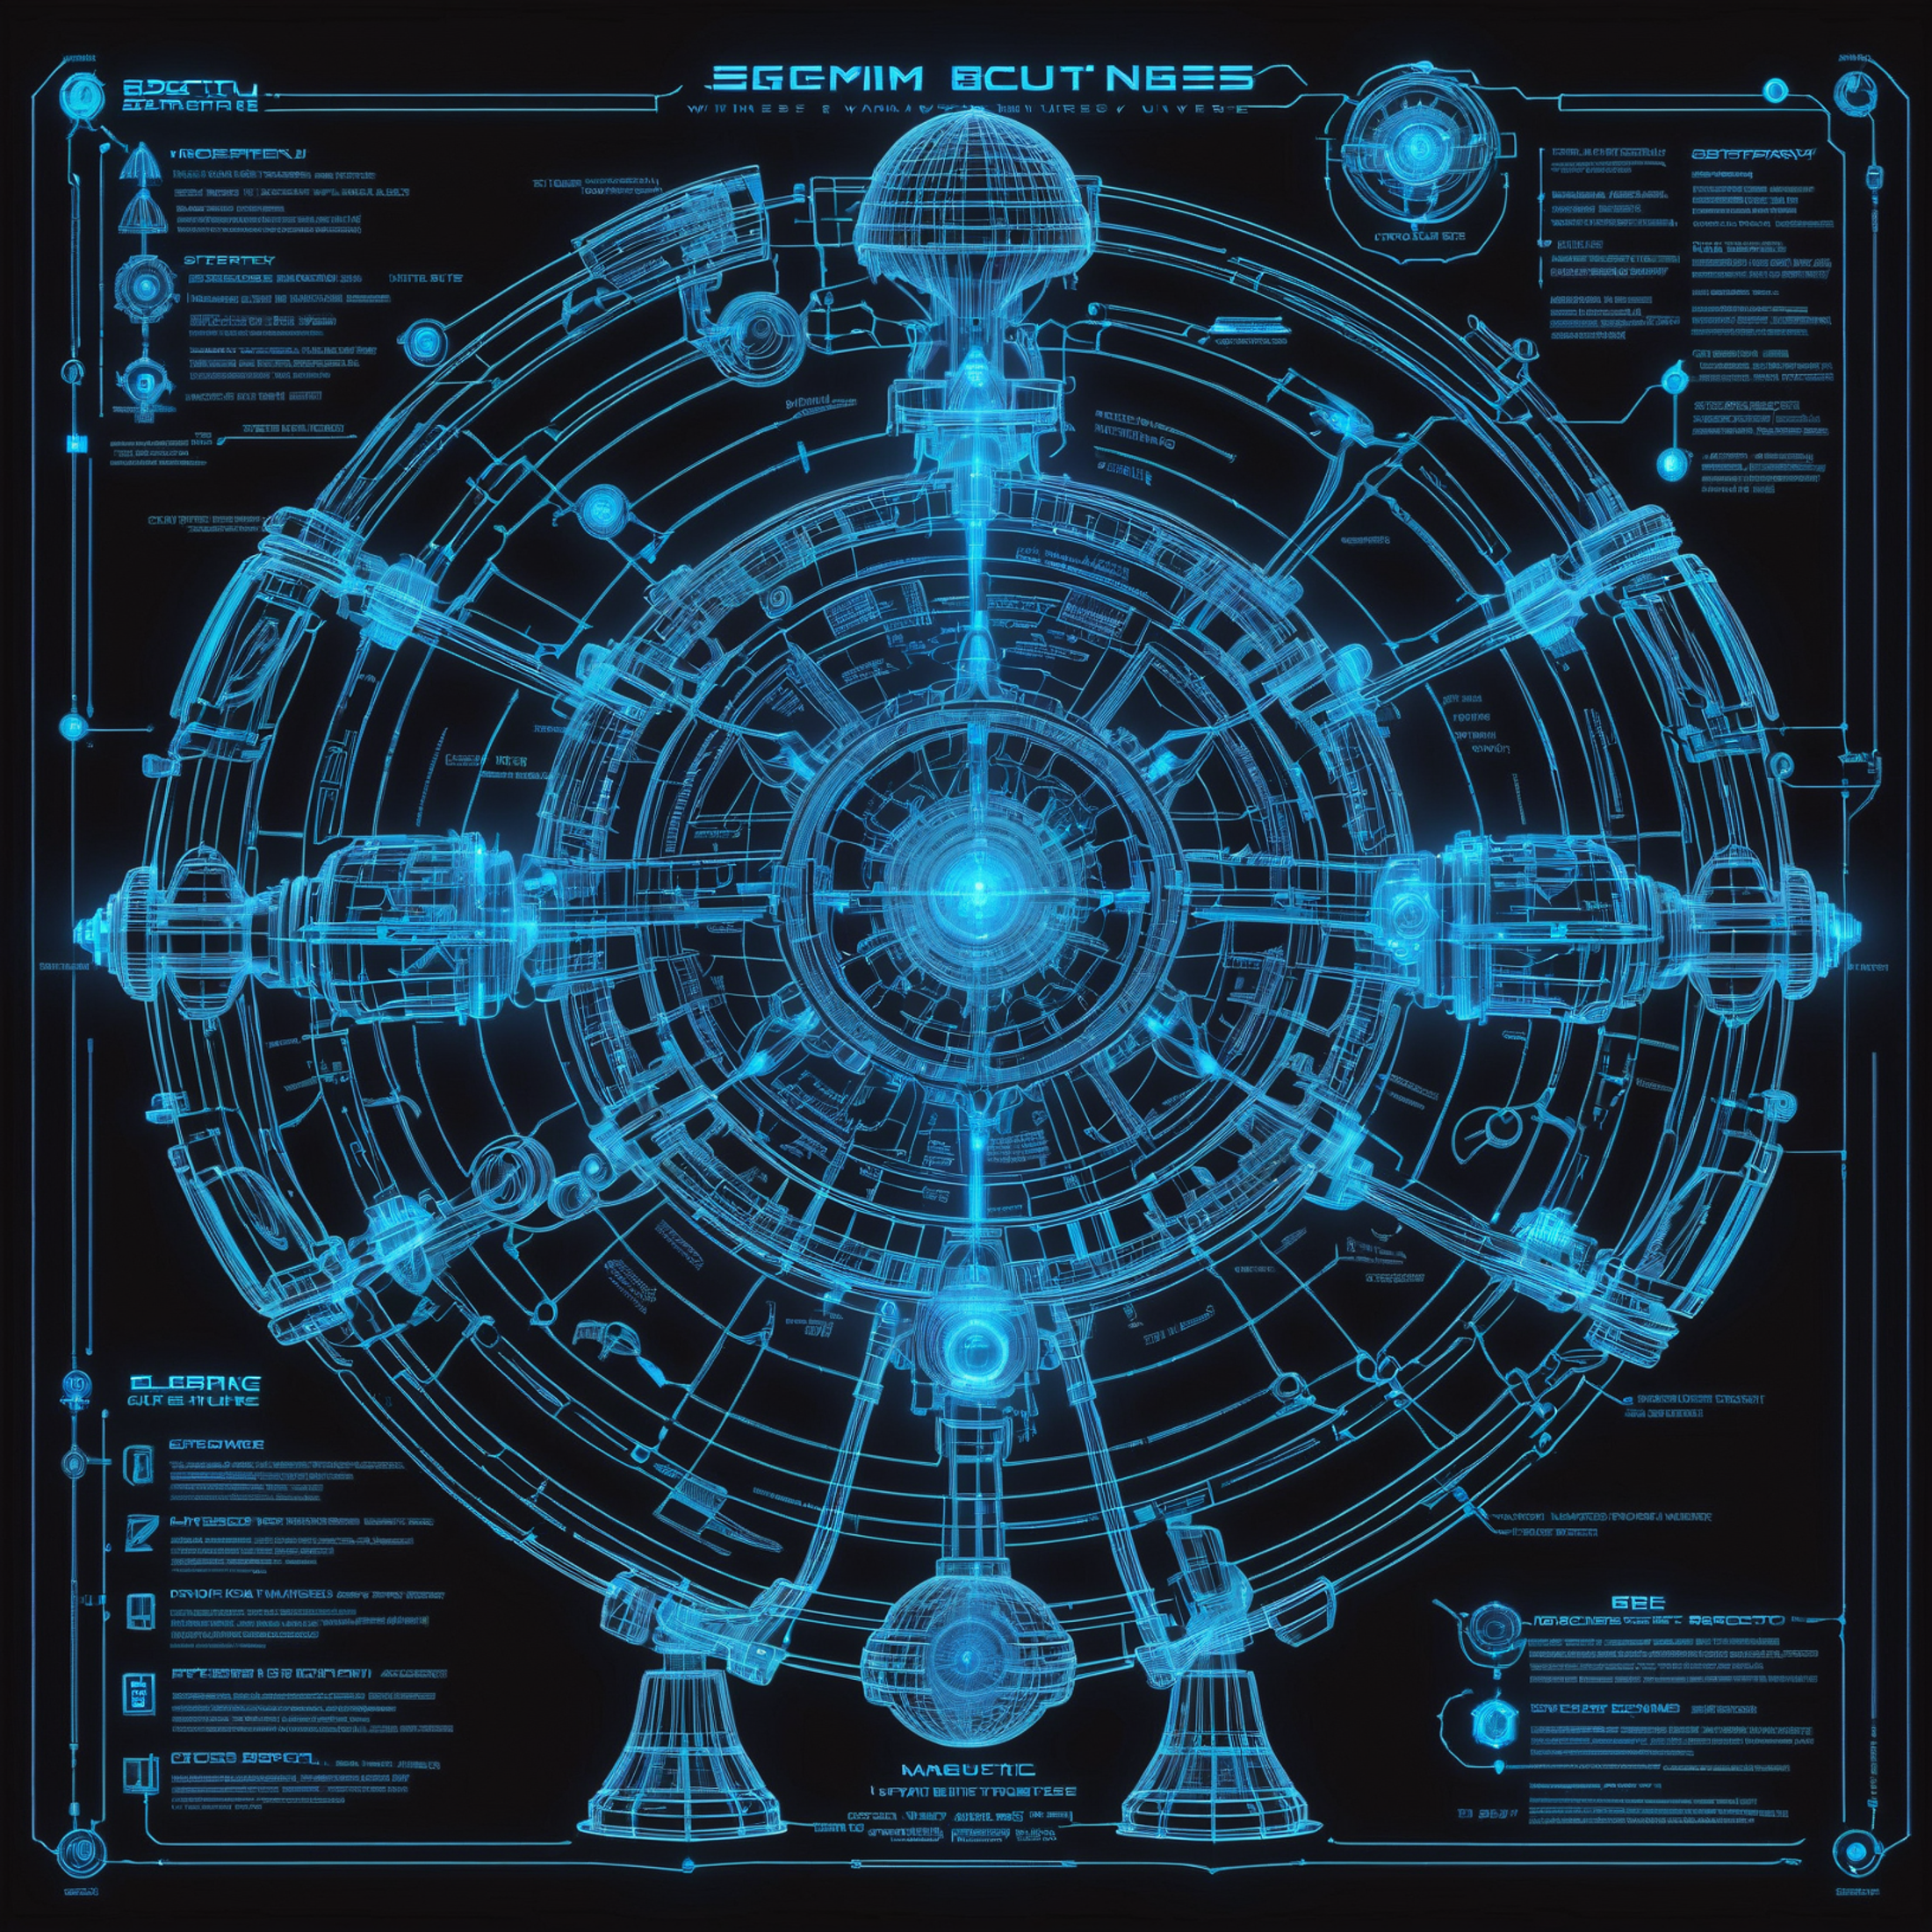 glowing blue on black 3d wireframe, diagram, cyberpunk, scifi, Majestic,whimsical fantasy arcology at the end of the unive...